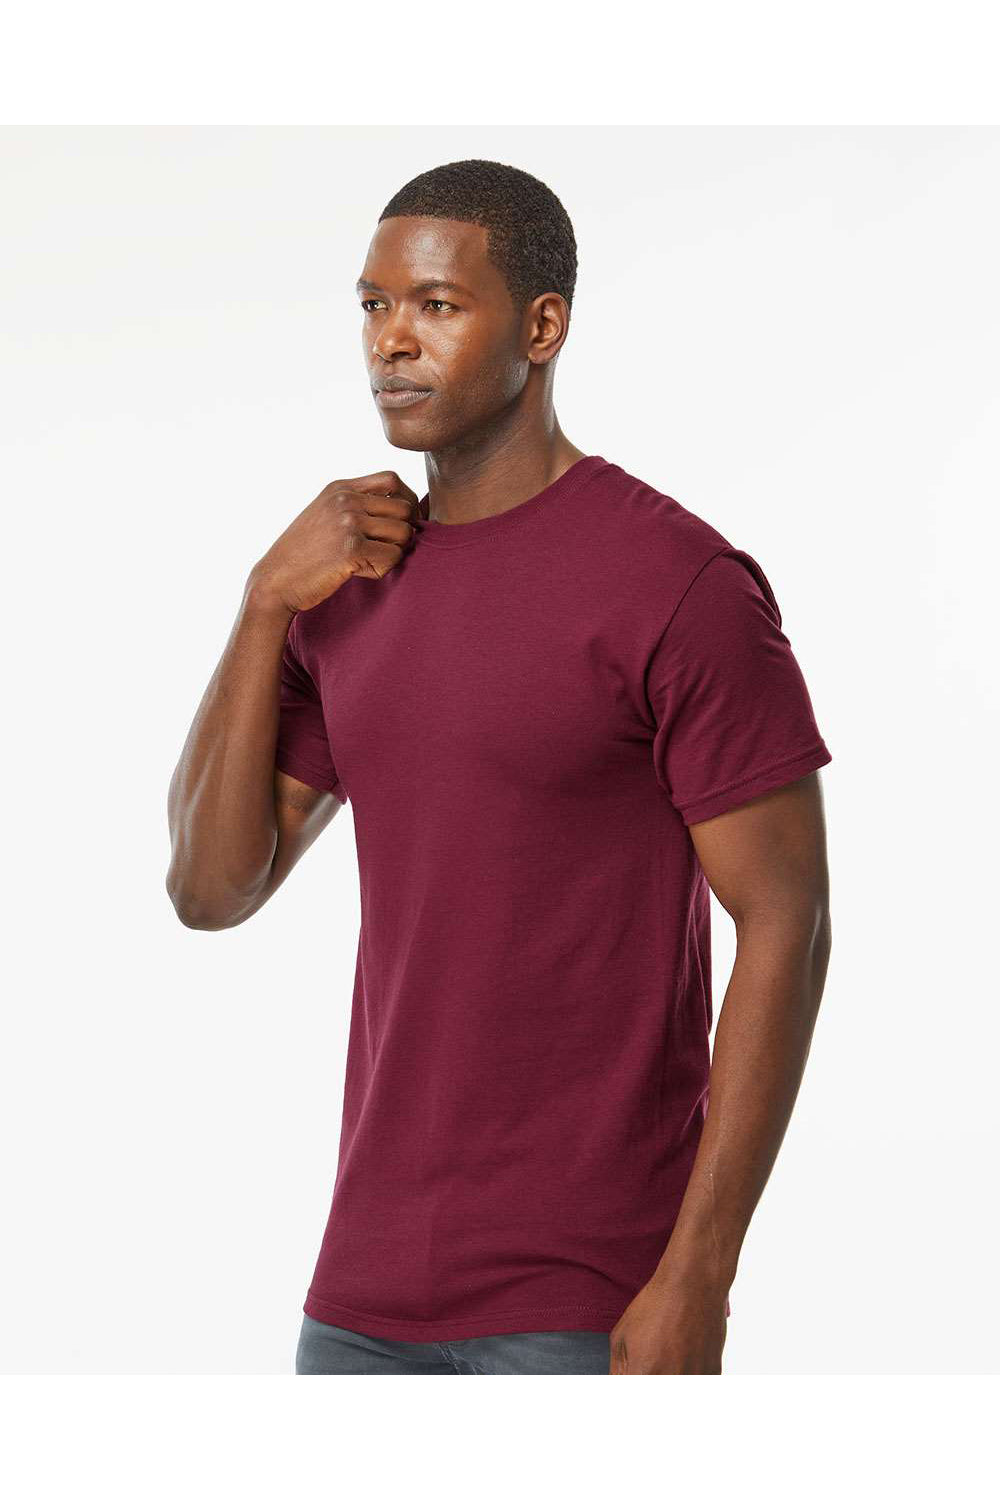 M&O 4800 Mens Gold Soft Touch Short Sleeve Crewneck T-Shirt Maroon Model Side